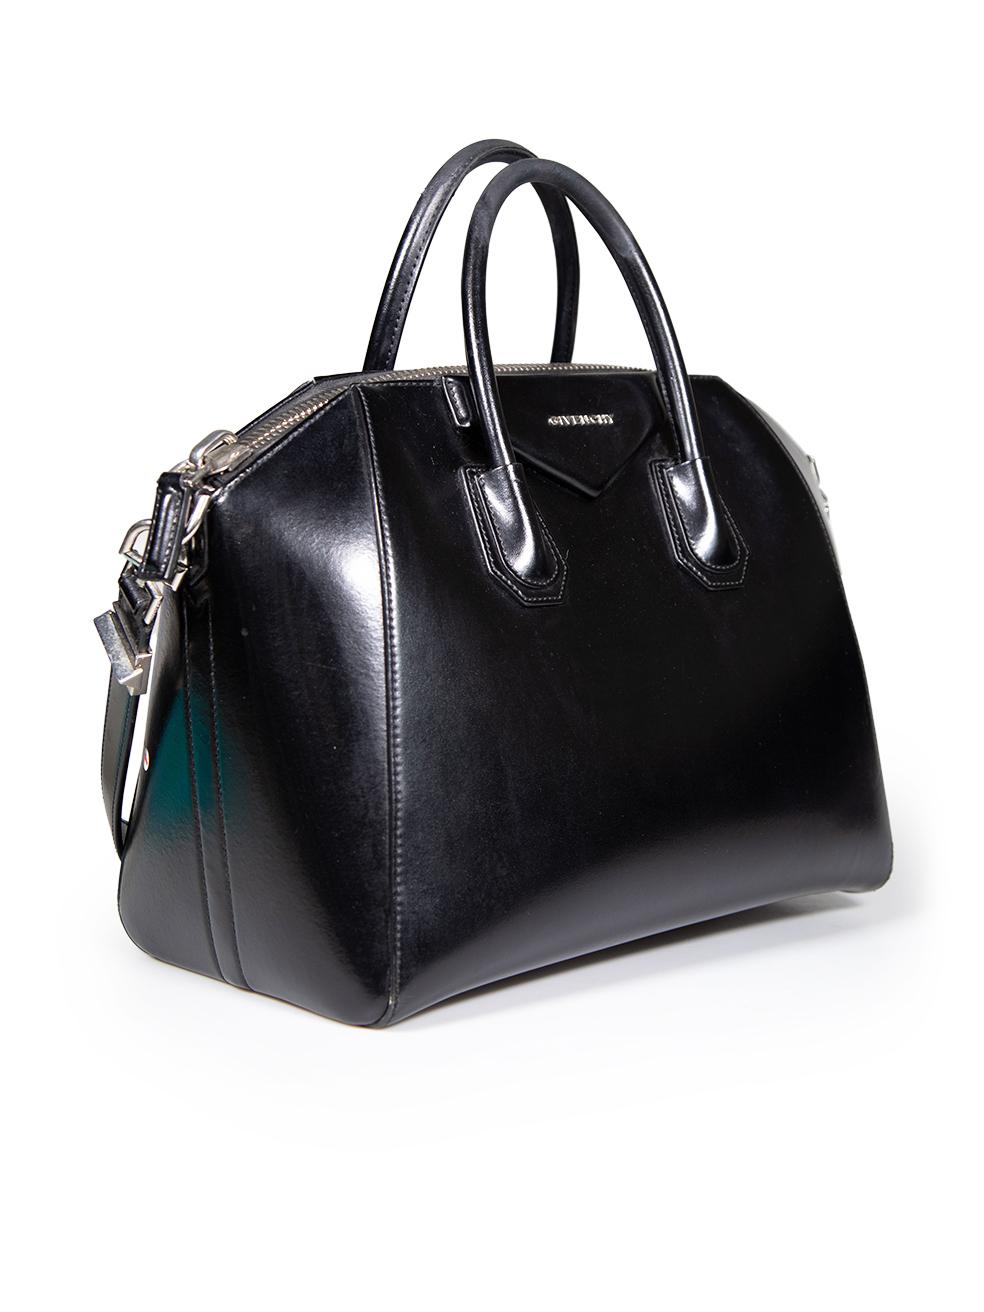 CONDITION is Good. Minor wear to bag is evident. Light wear to handles with peeling to the leather coating. Wear to base corners, sides, front and back as well as discolouration to internal top line on this used Givenchy designer resale item.
 
 
 
